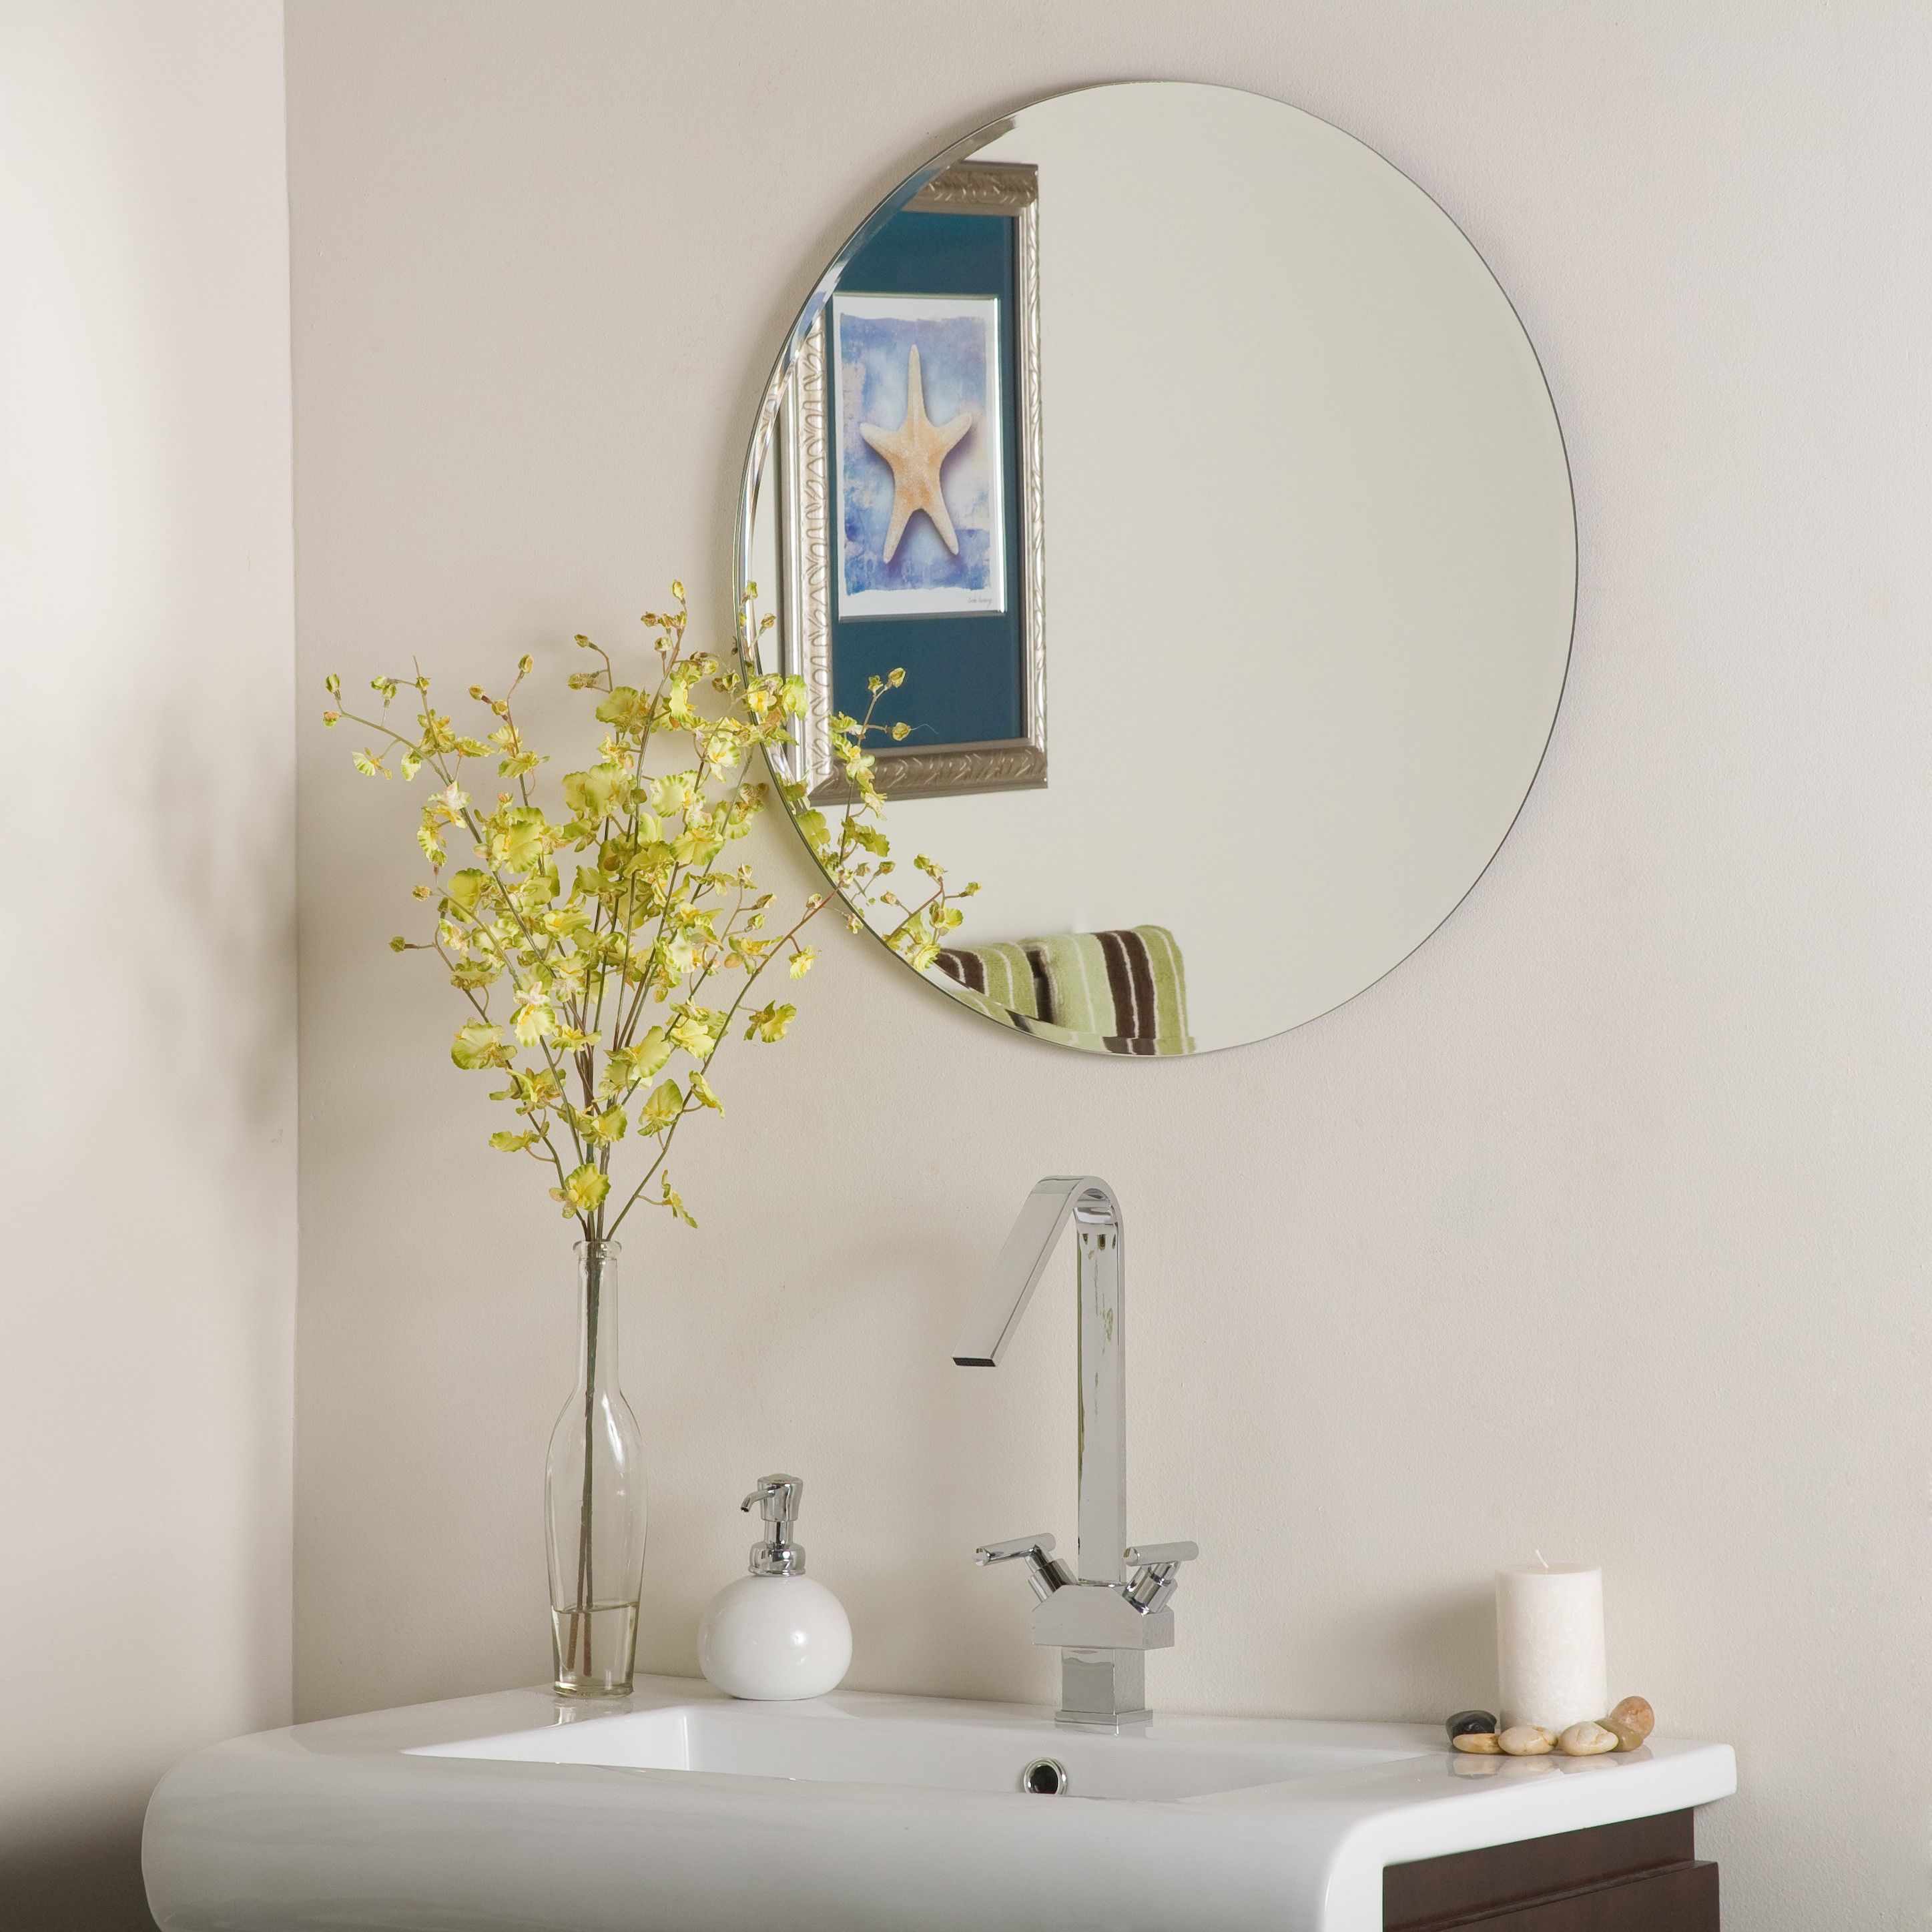 Wallingford Large Frameless Wall Mirrors Regarding Widely Used Hang Mirrors Wall Rectangular Home Doors Mirror De Wallingford (View 3 of 20)